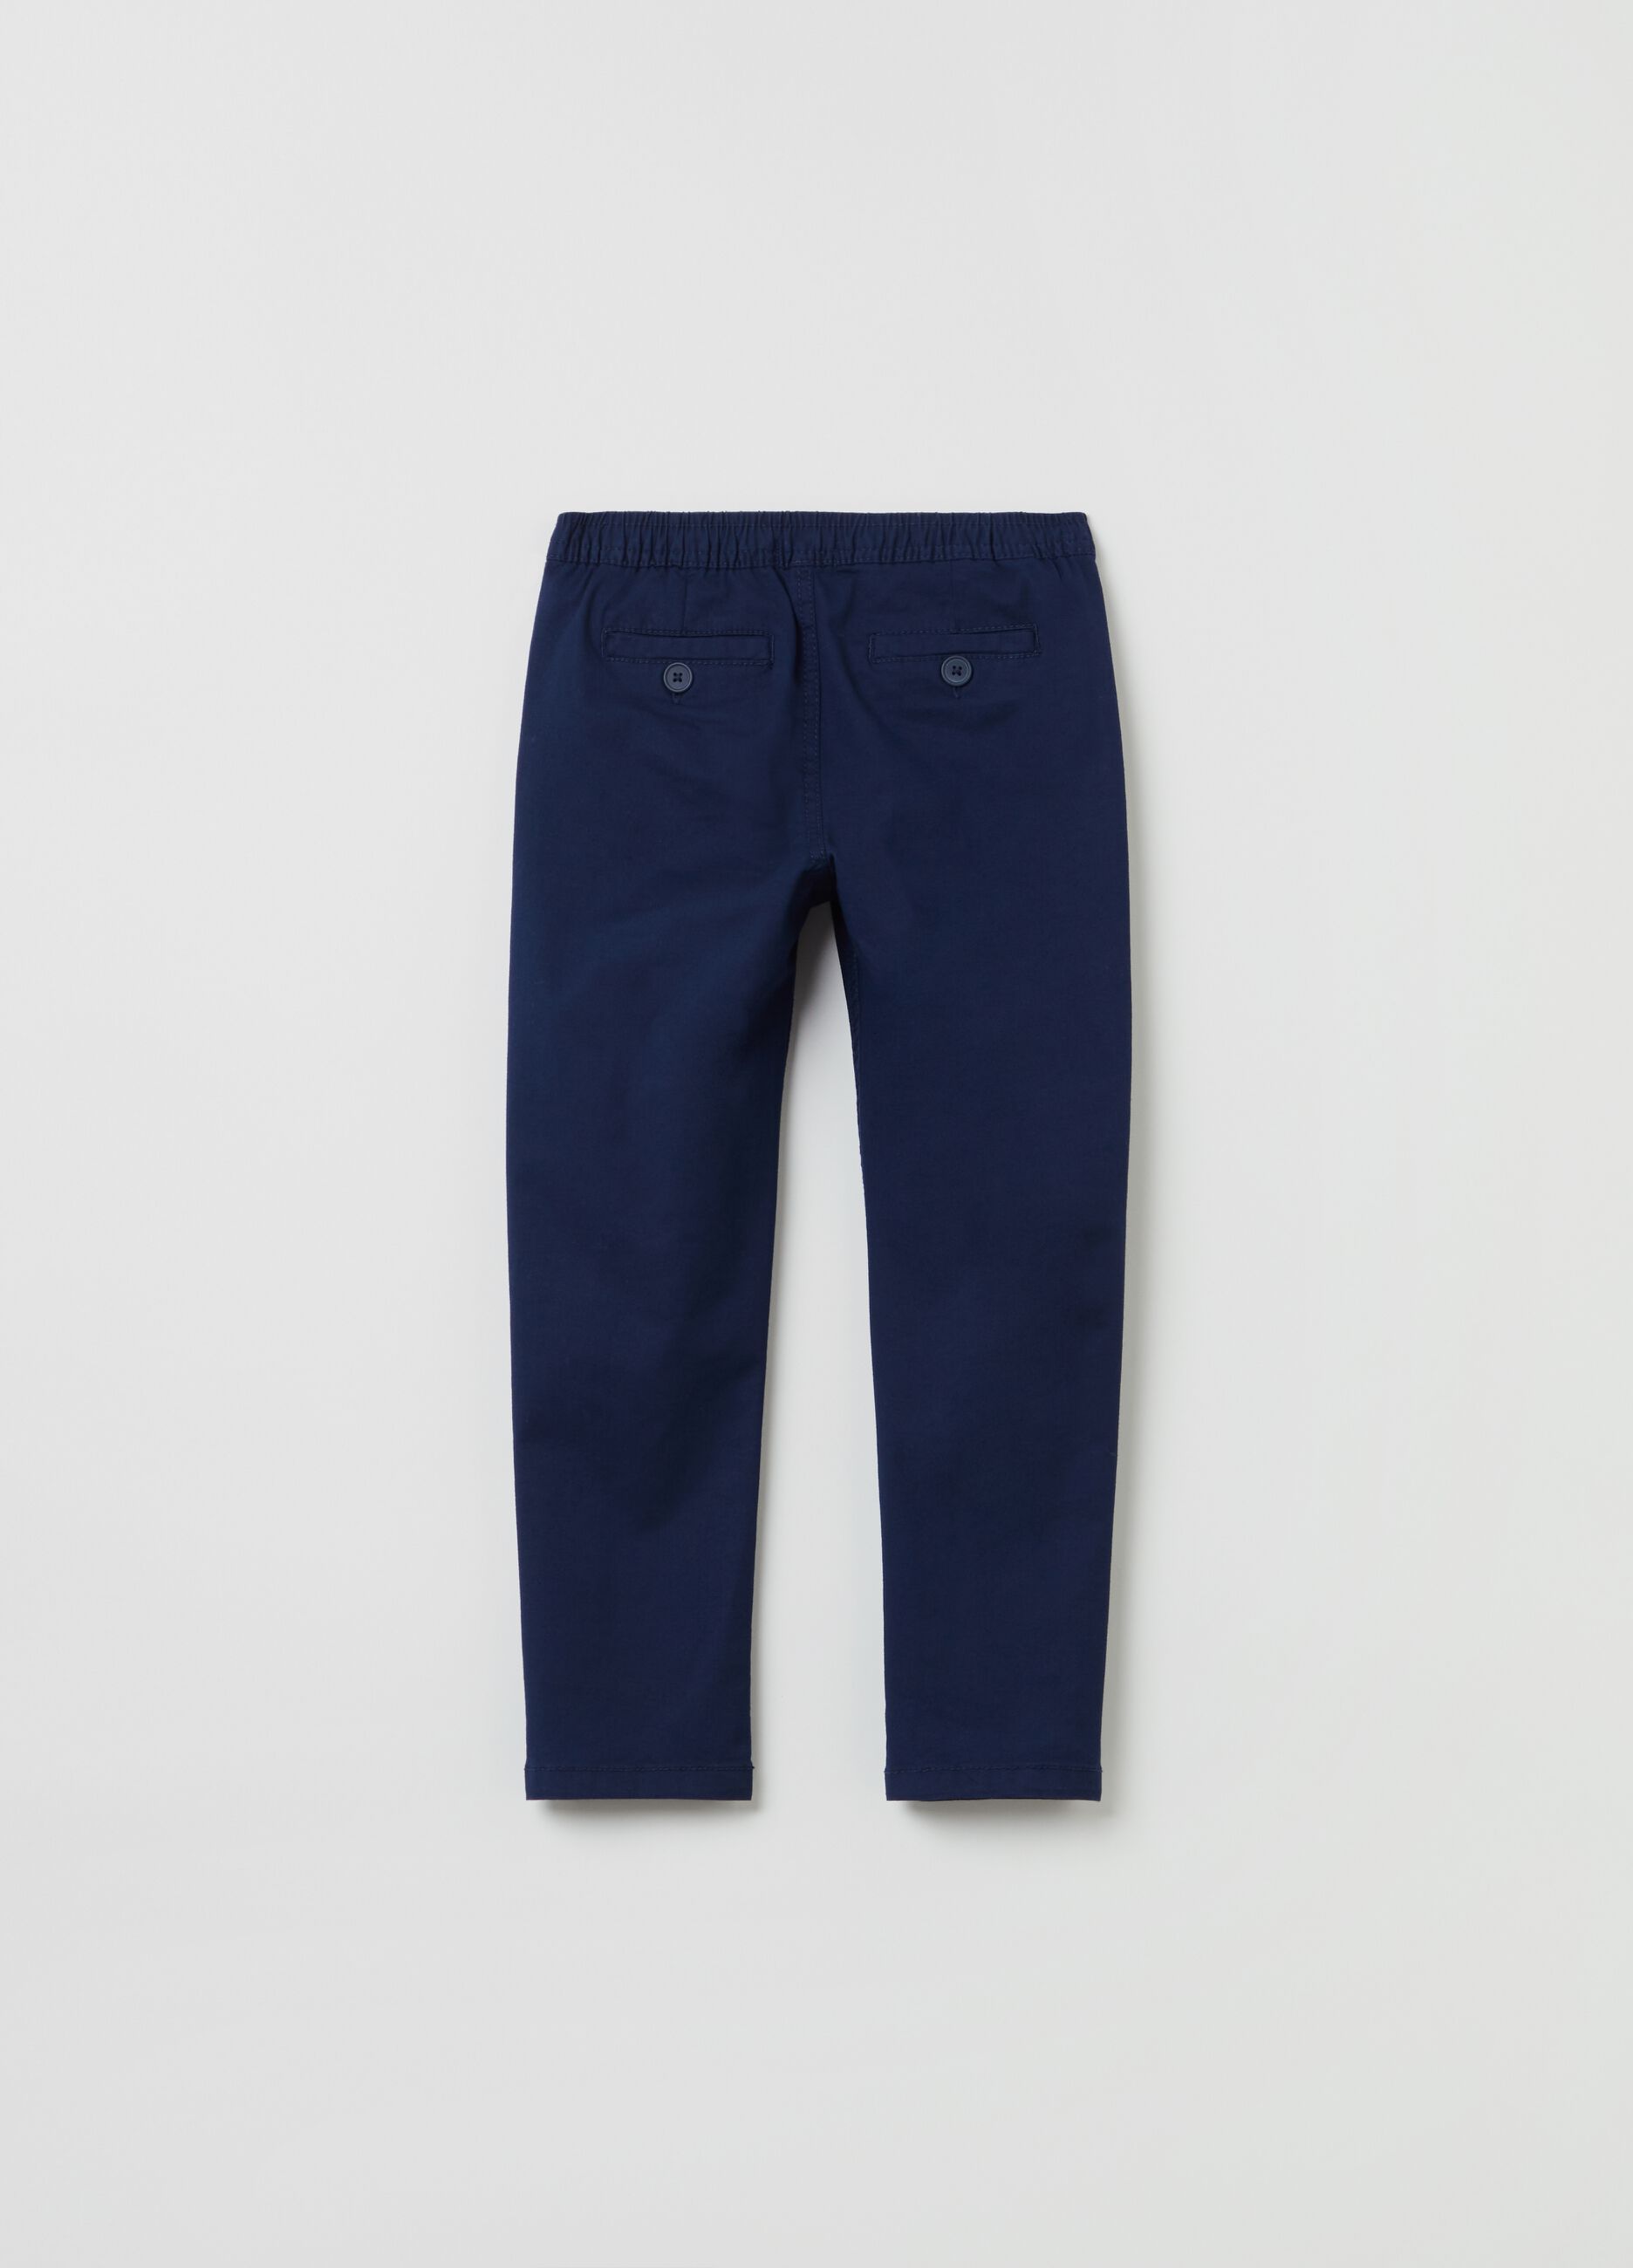 Stretch cotton joggers with pockets